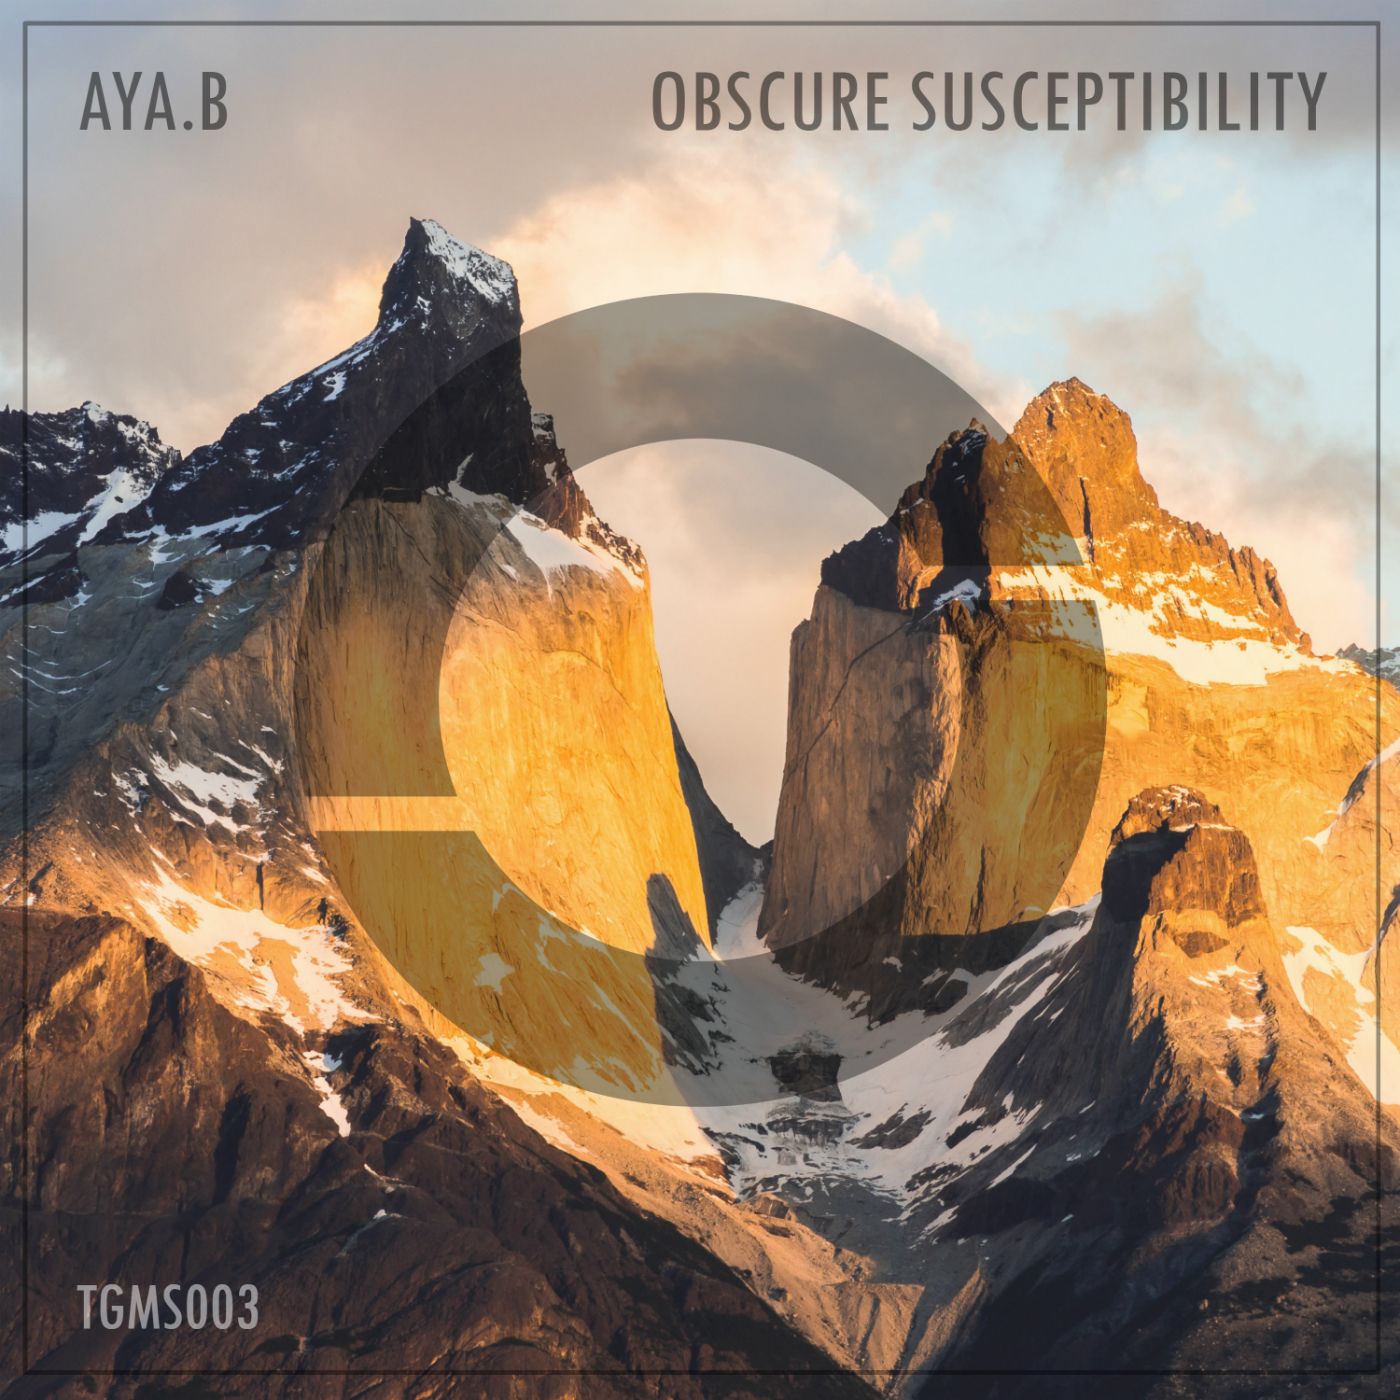 aya.b - obscure susceptibility